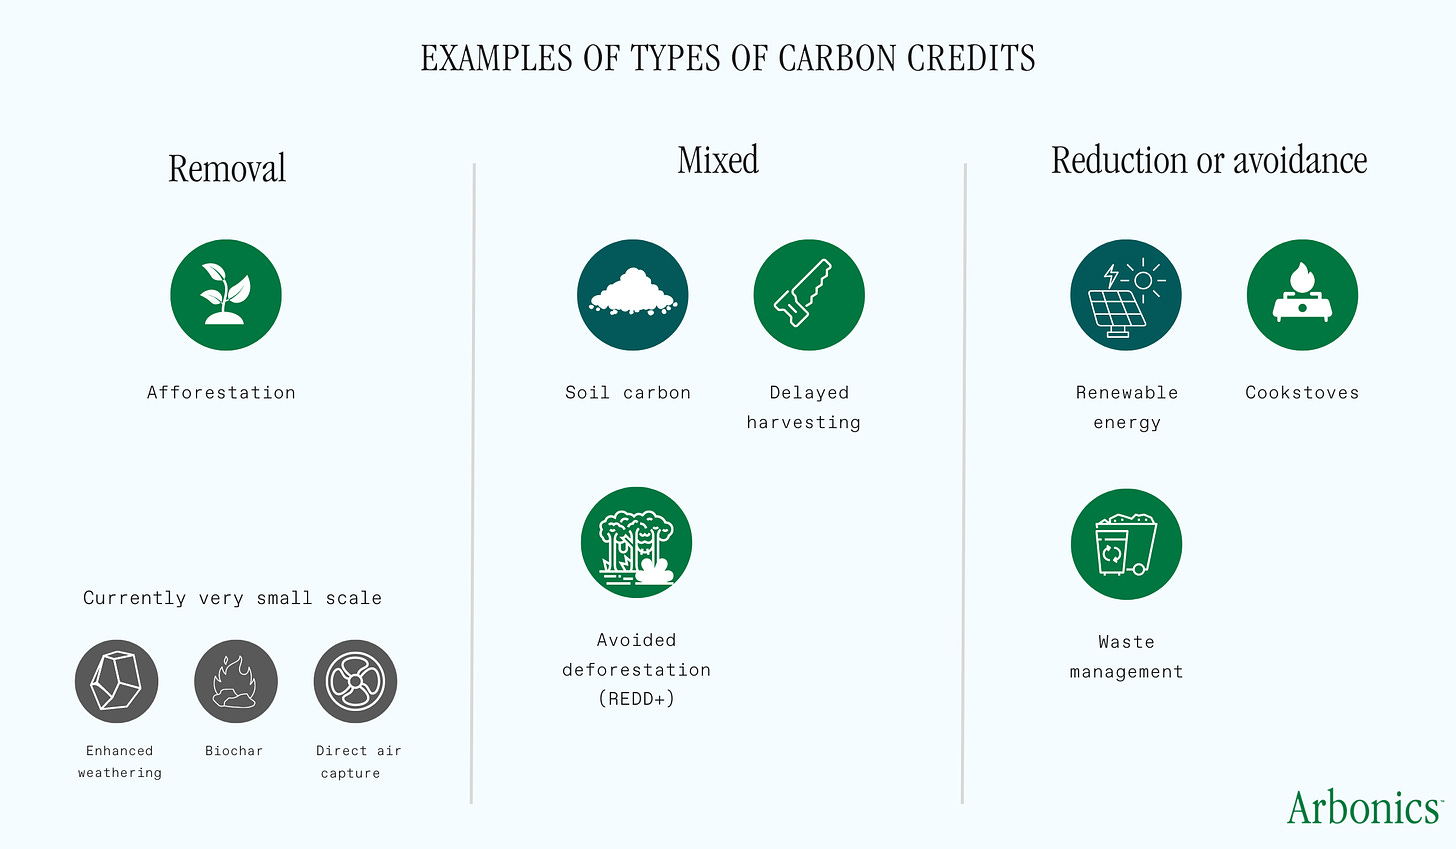 Infographic showing examples of different types of carbon credits in three categories: removal, mixed, reduction/avoidance